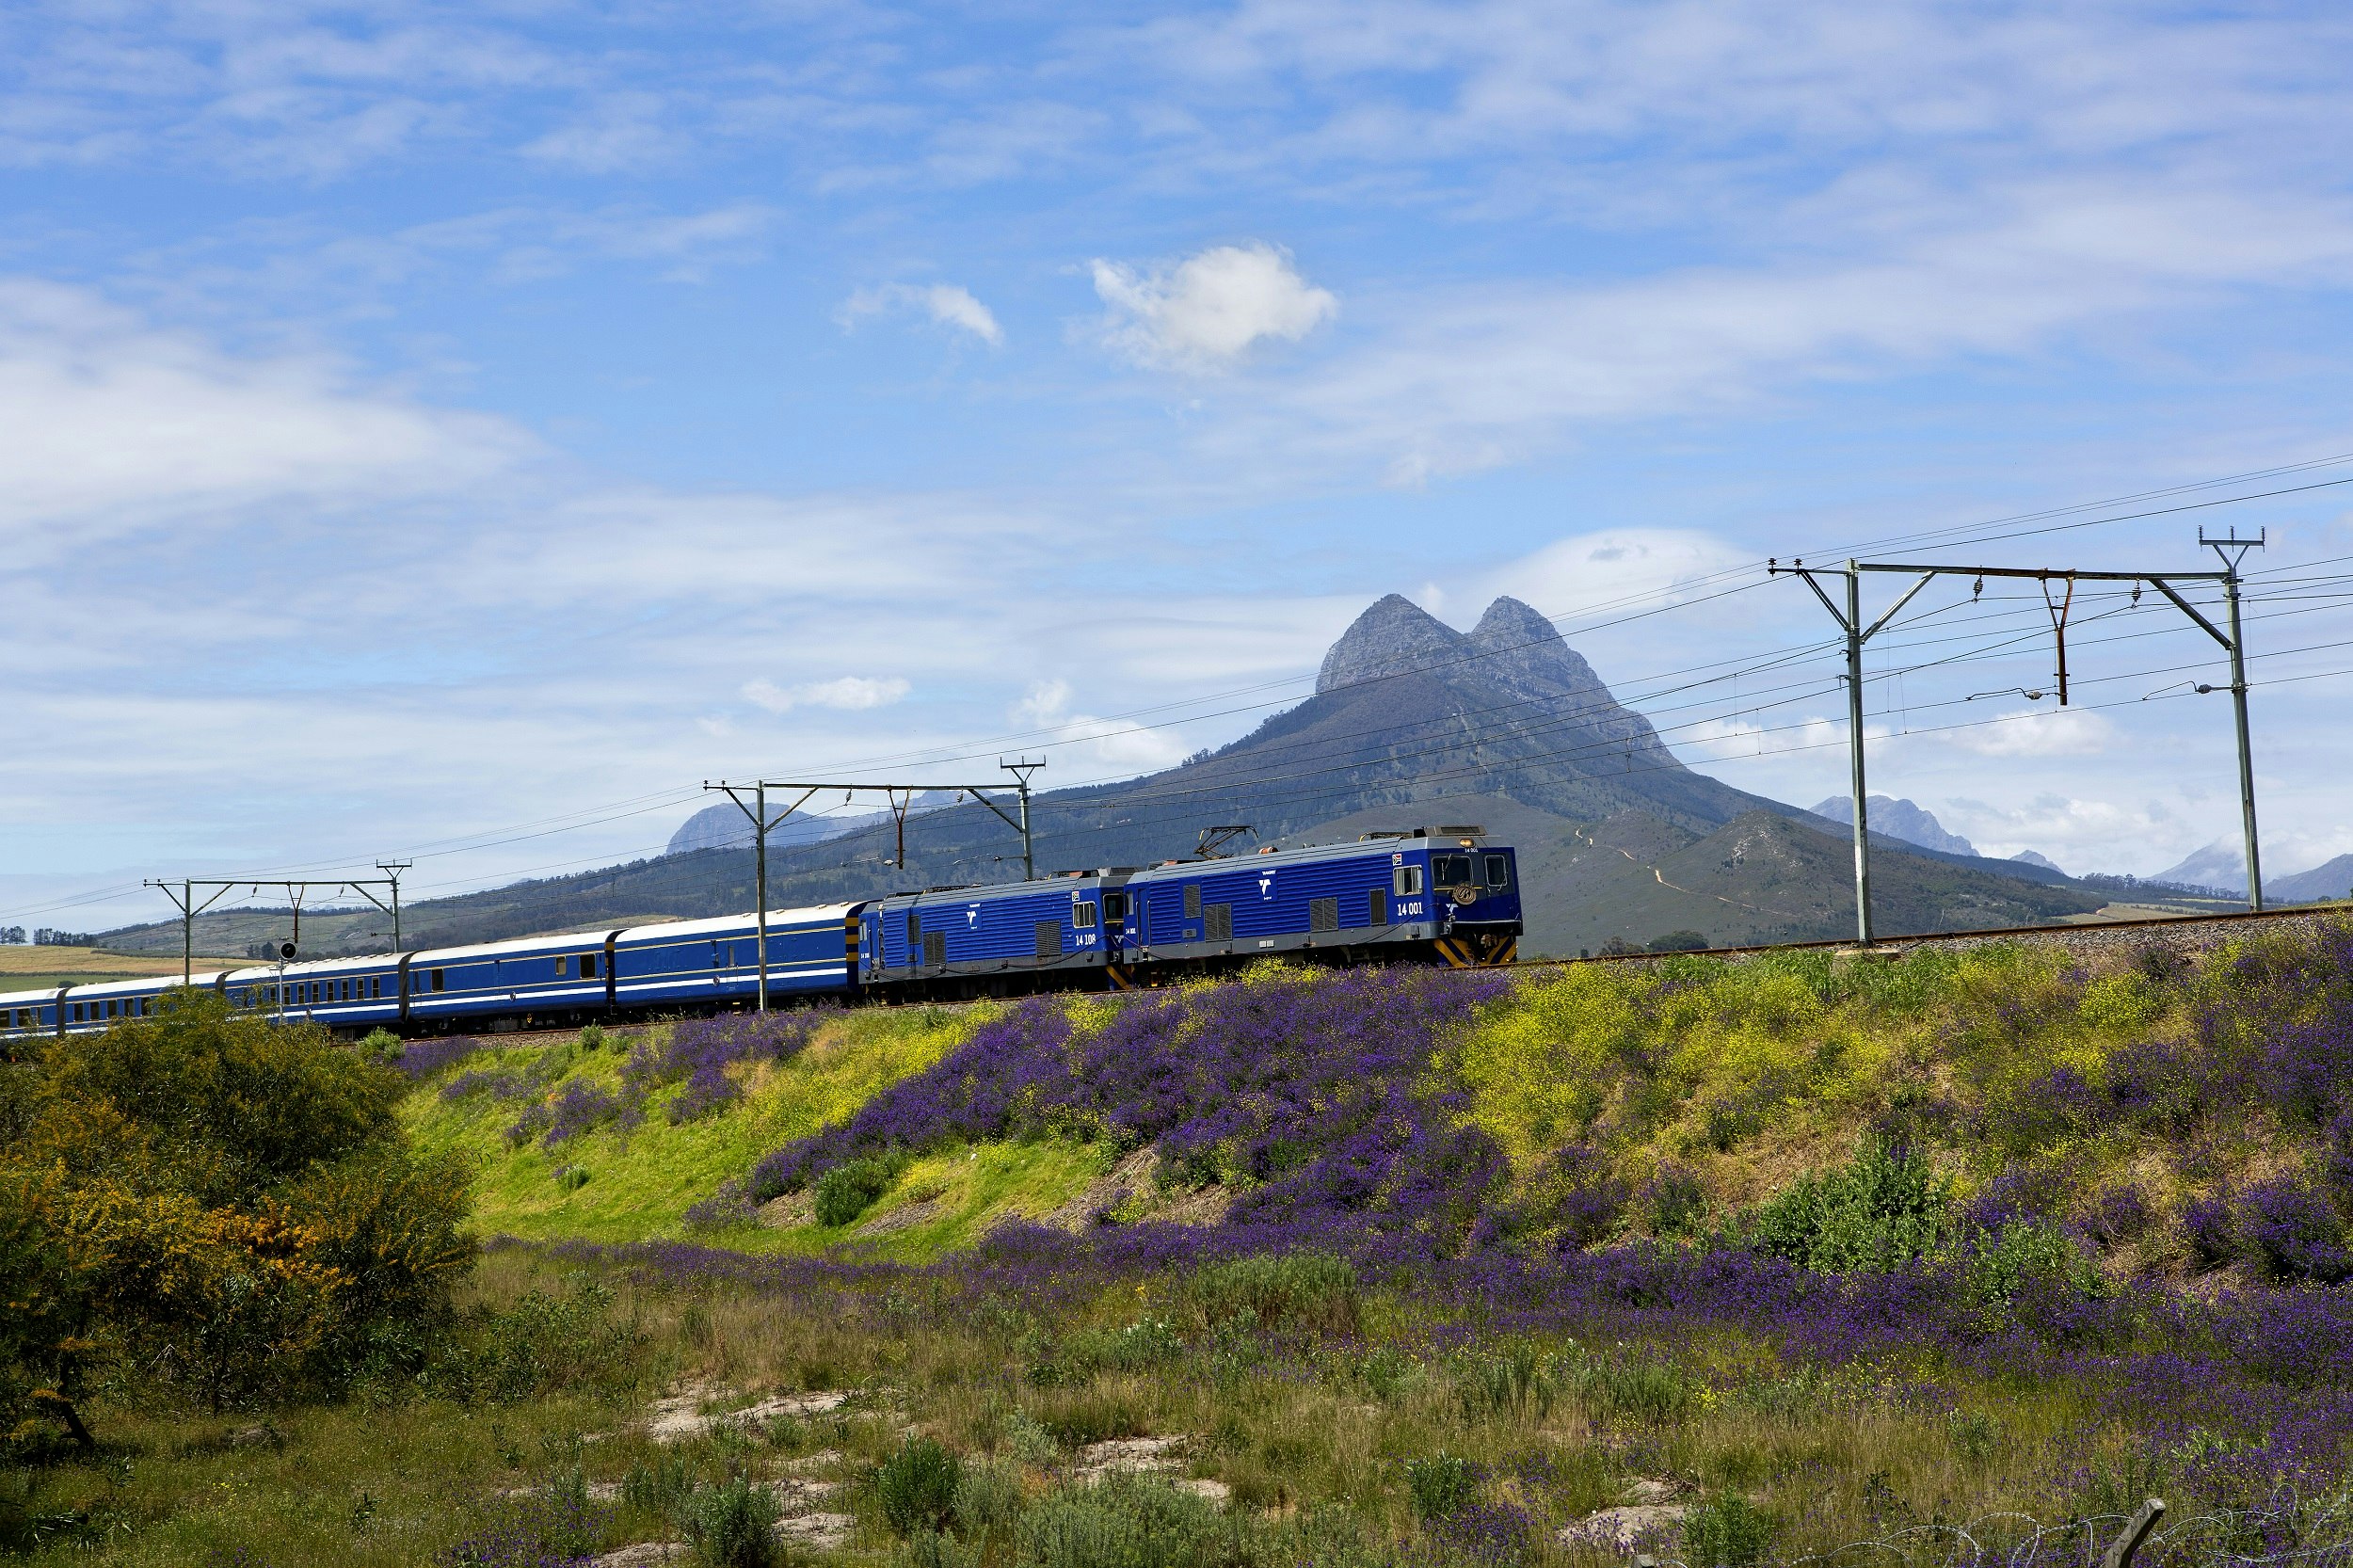 A train with blue carriages passes through stunning grassy landscapes, with high peaks in the background